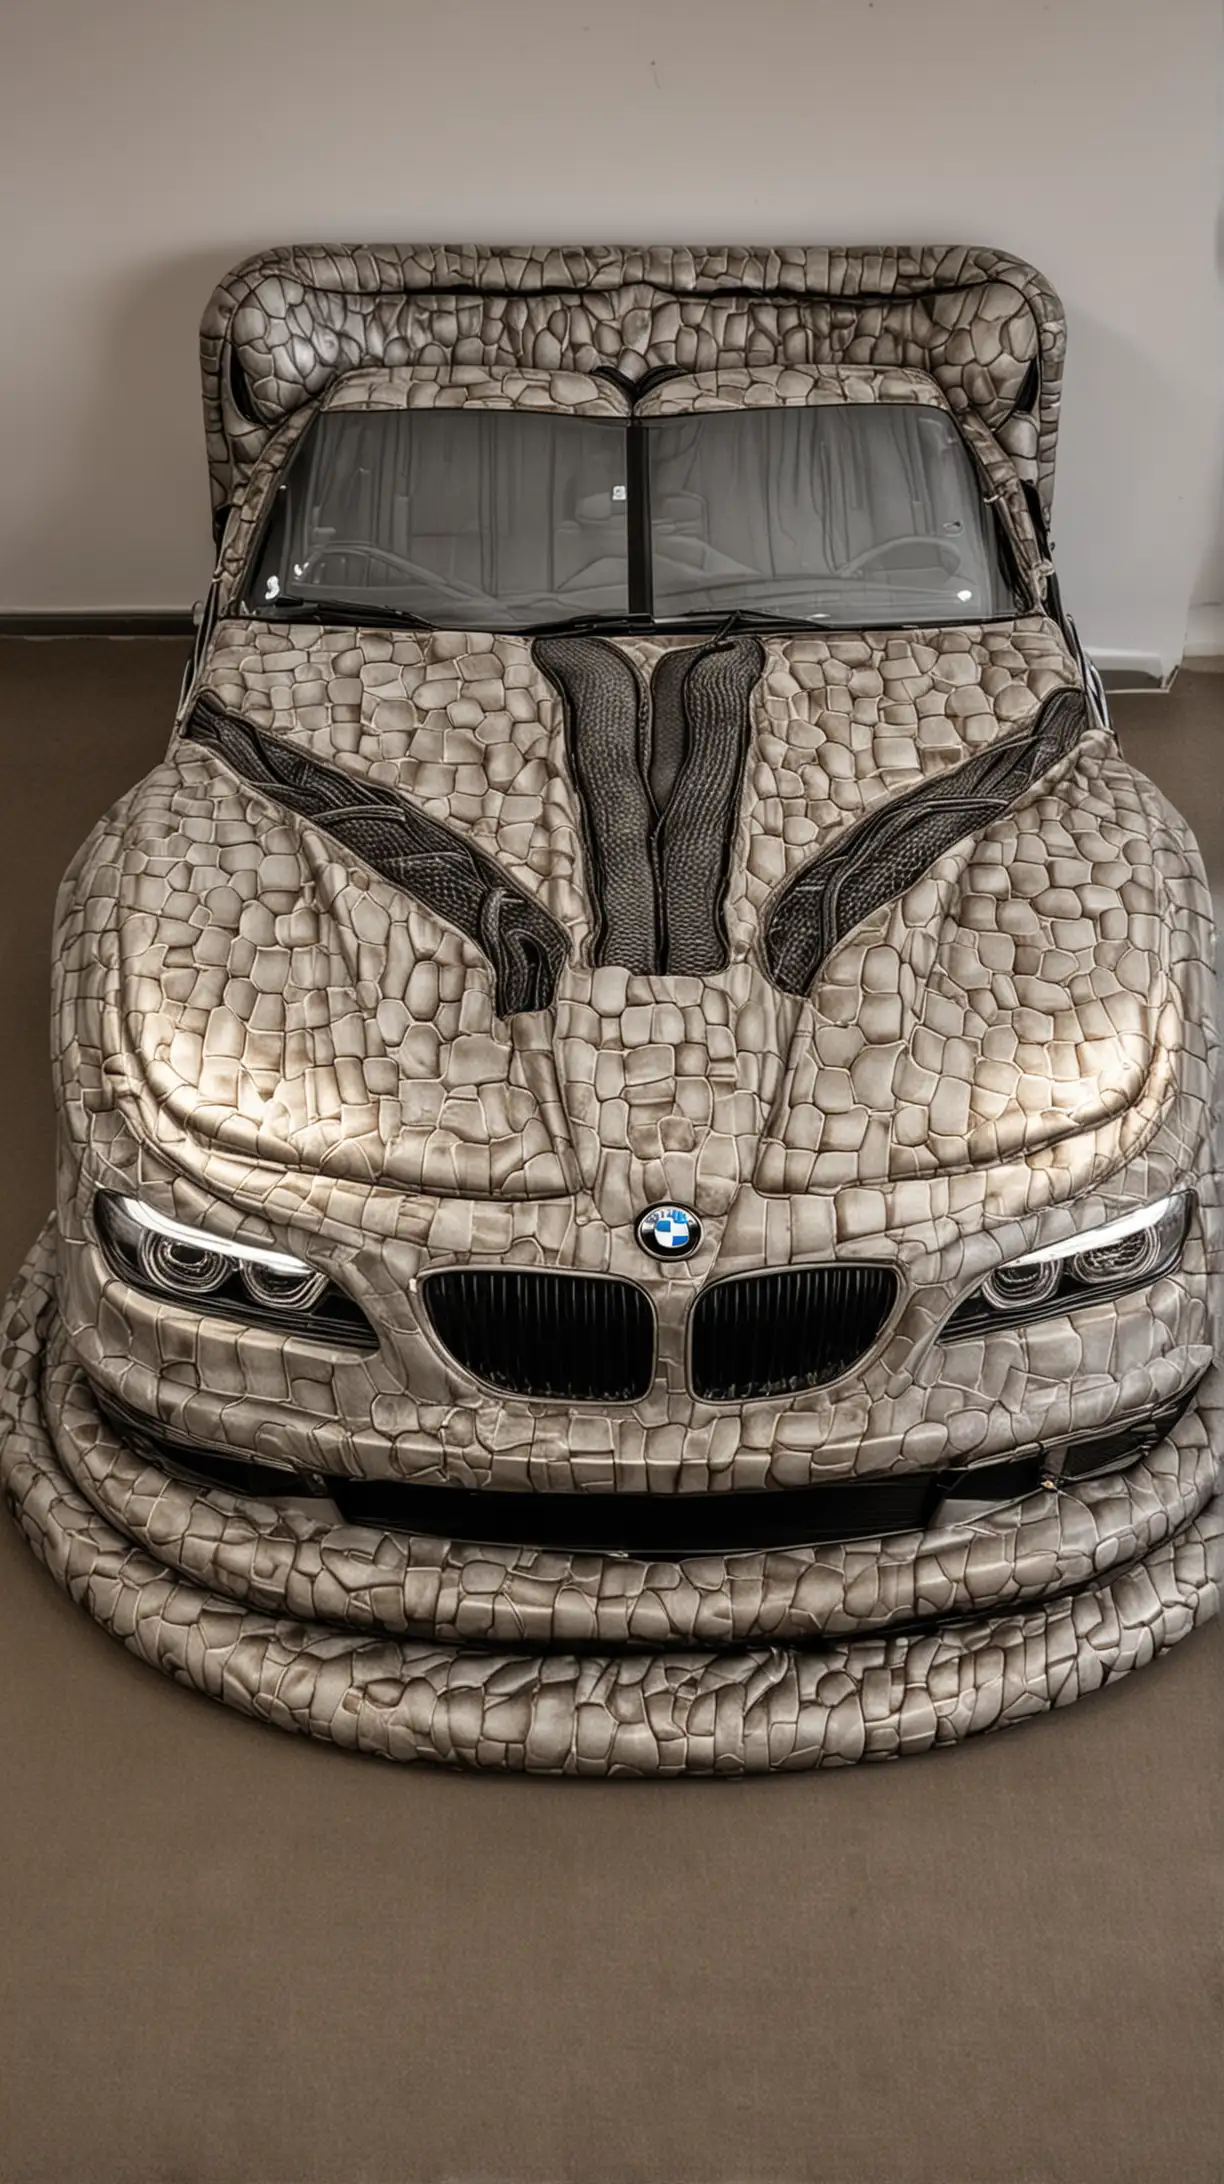 BMW car shaped double bed with headlights on and cobra snake graphics